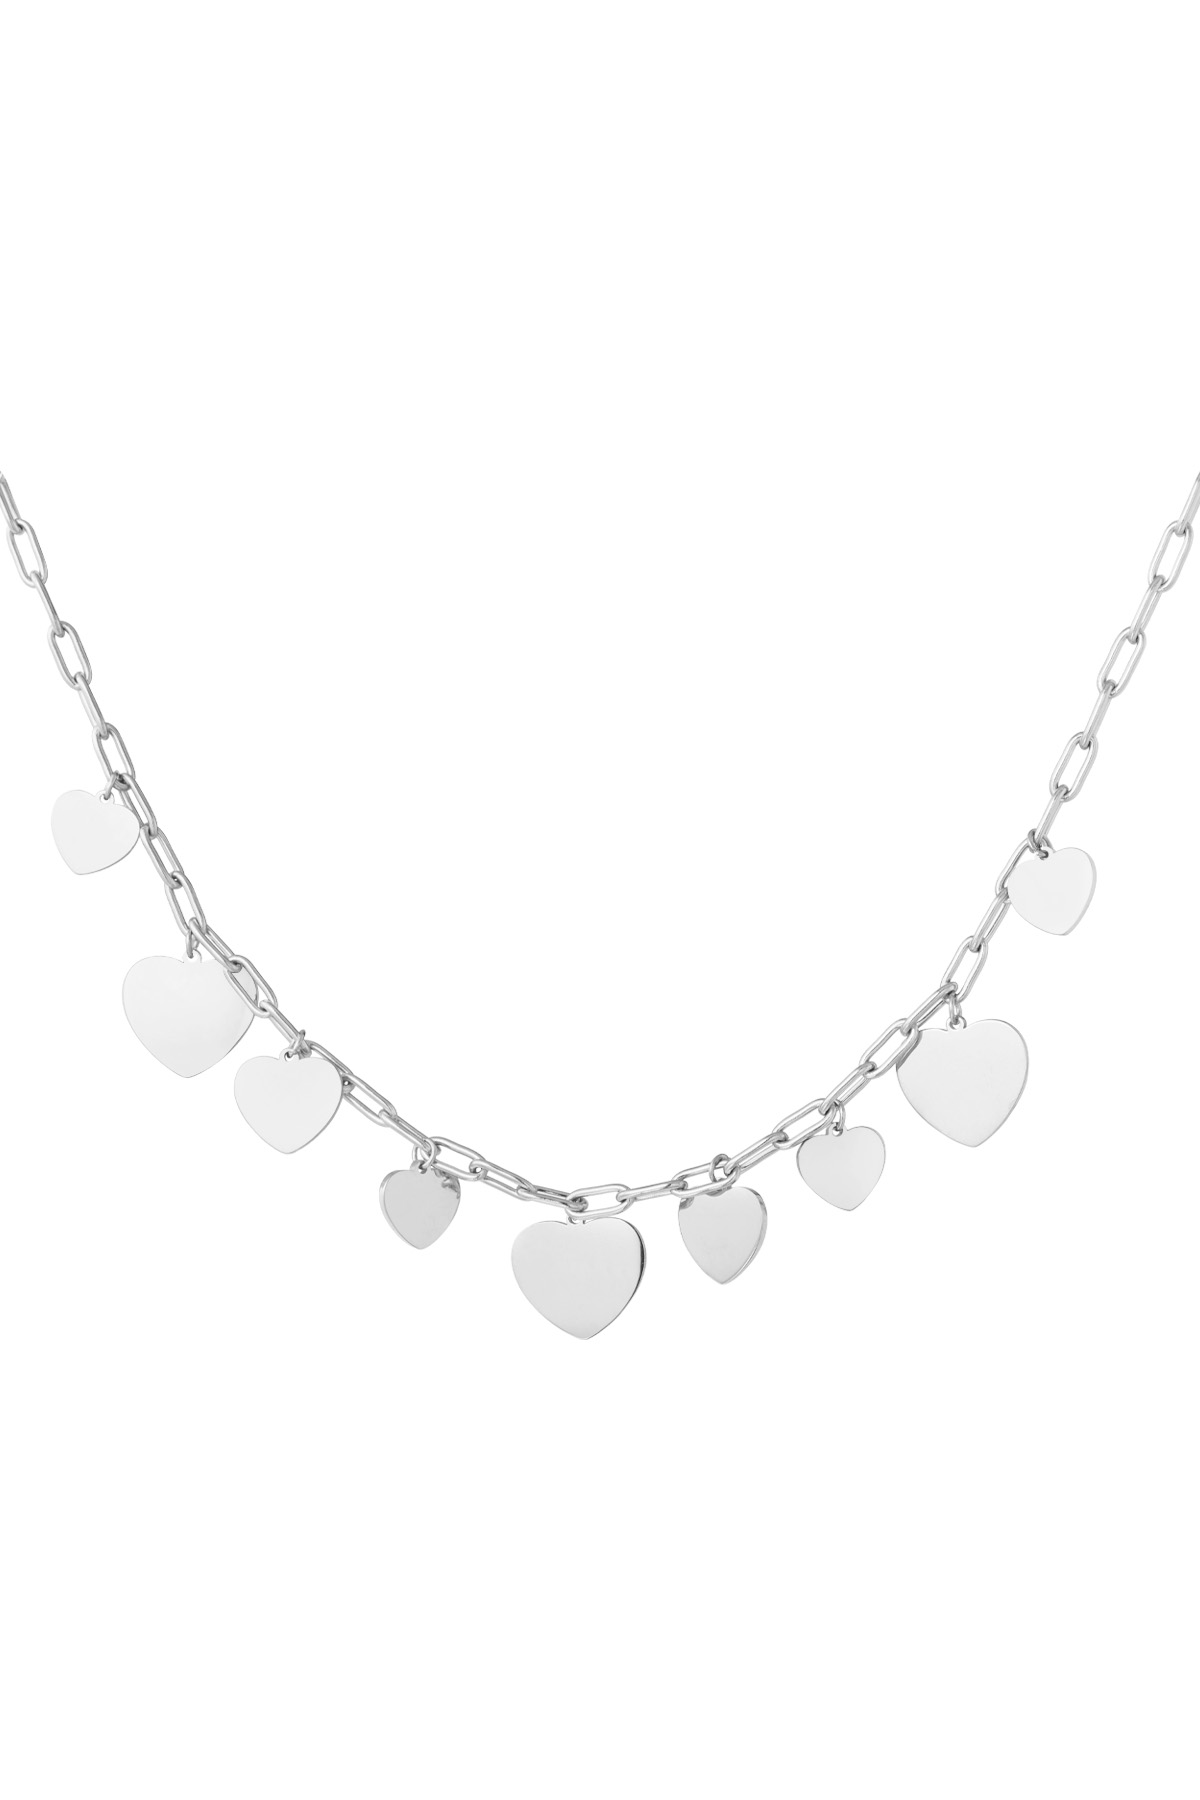 Chunky heart party necklace - silver